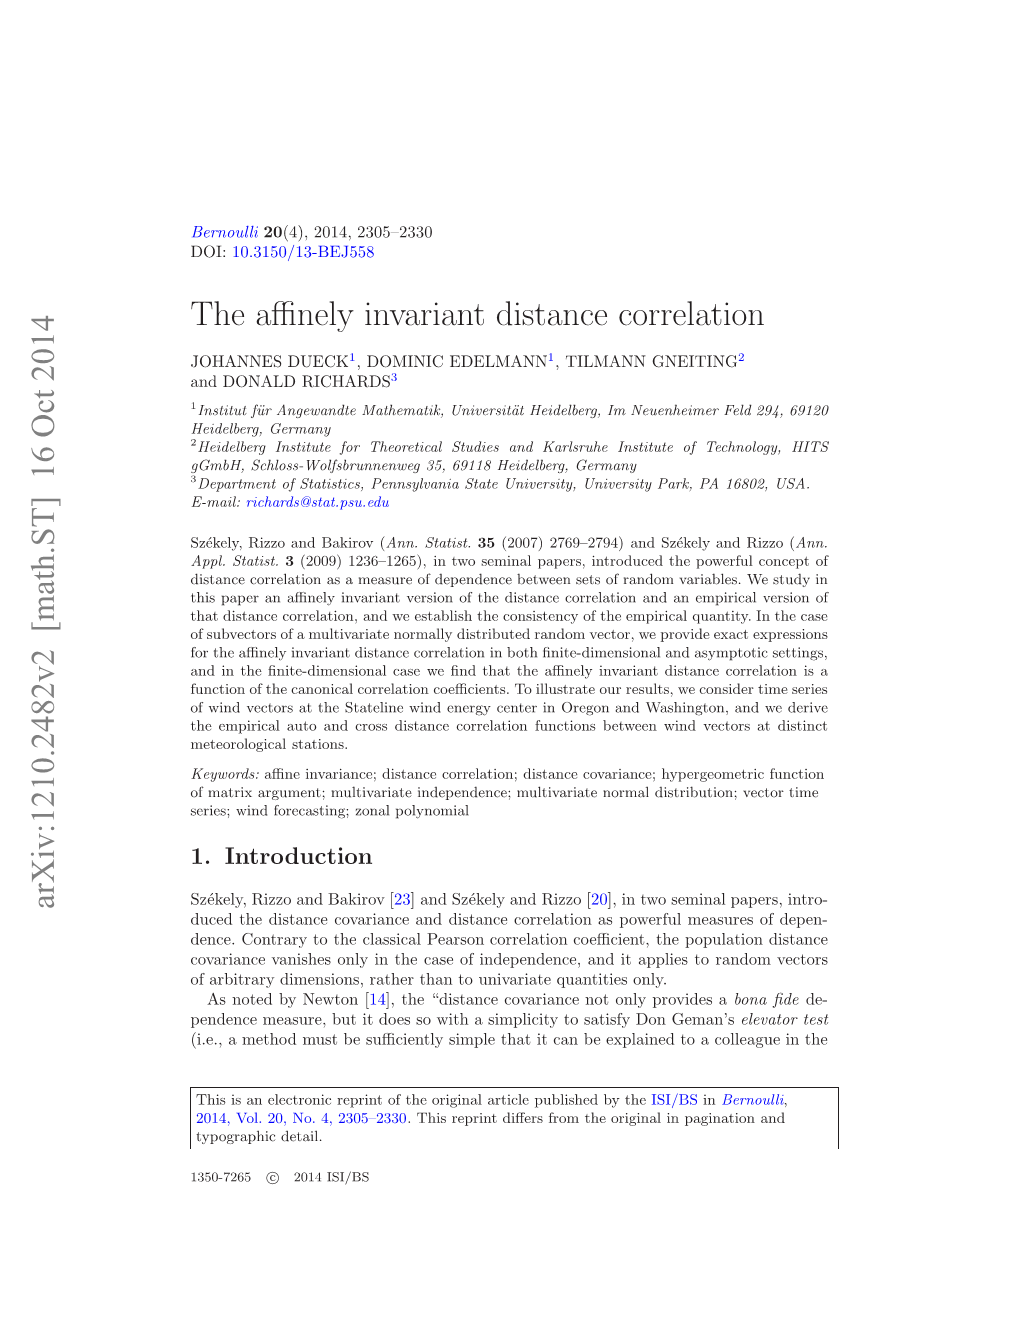 The Affinely Invariant Distance Correlation